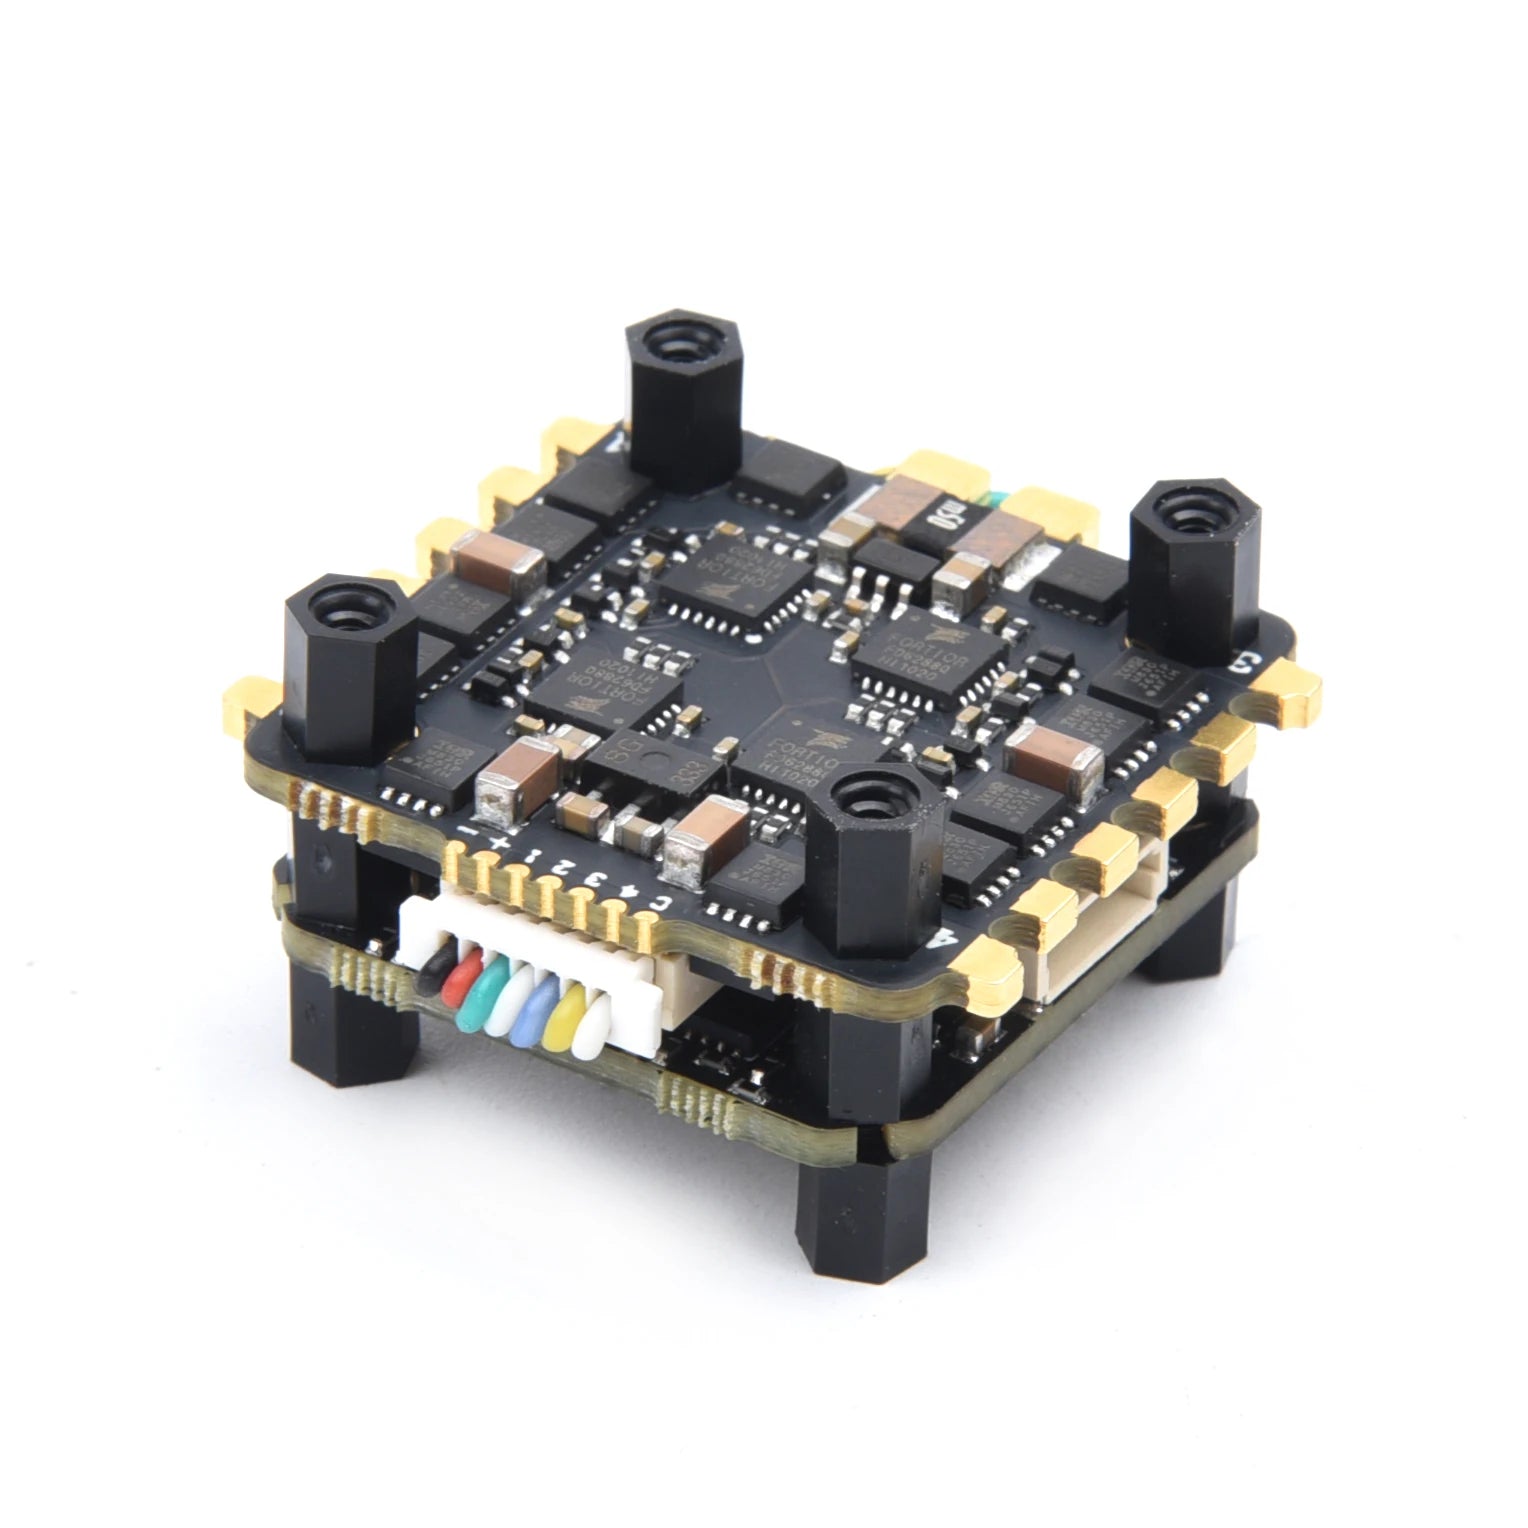 ELF 88mm Micro Quadcopter, Suitable for mini flight controller with 20mm hole pitch .